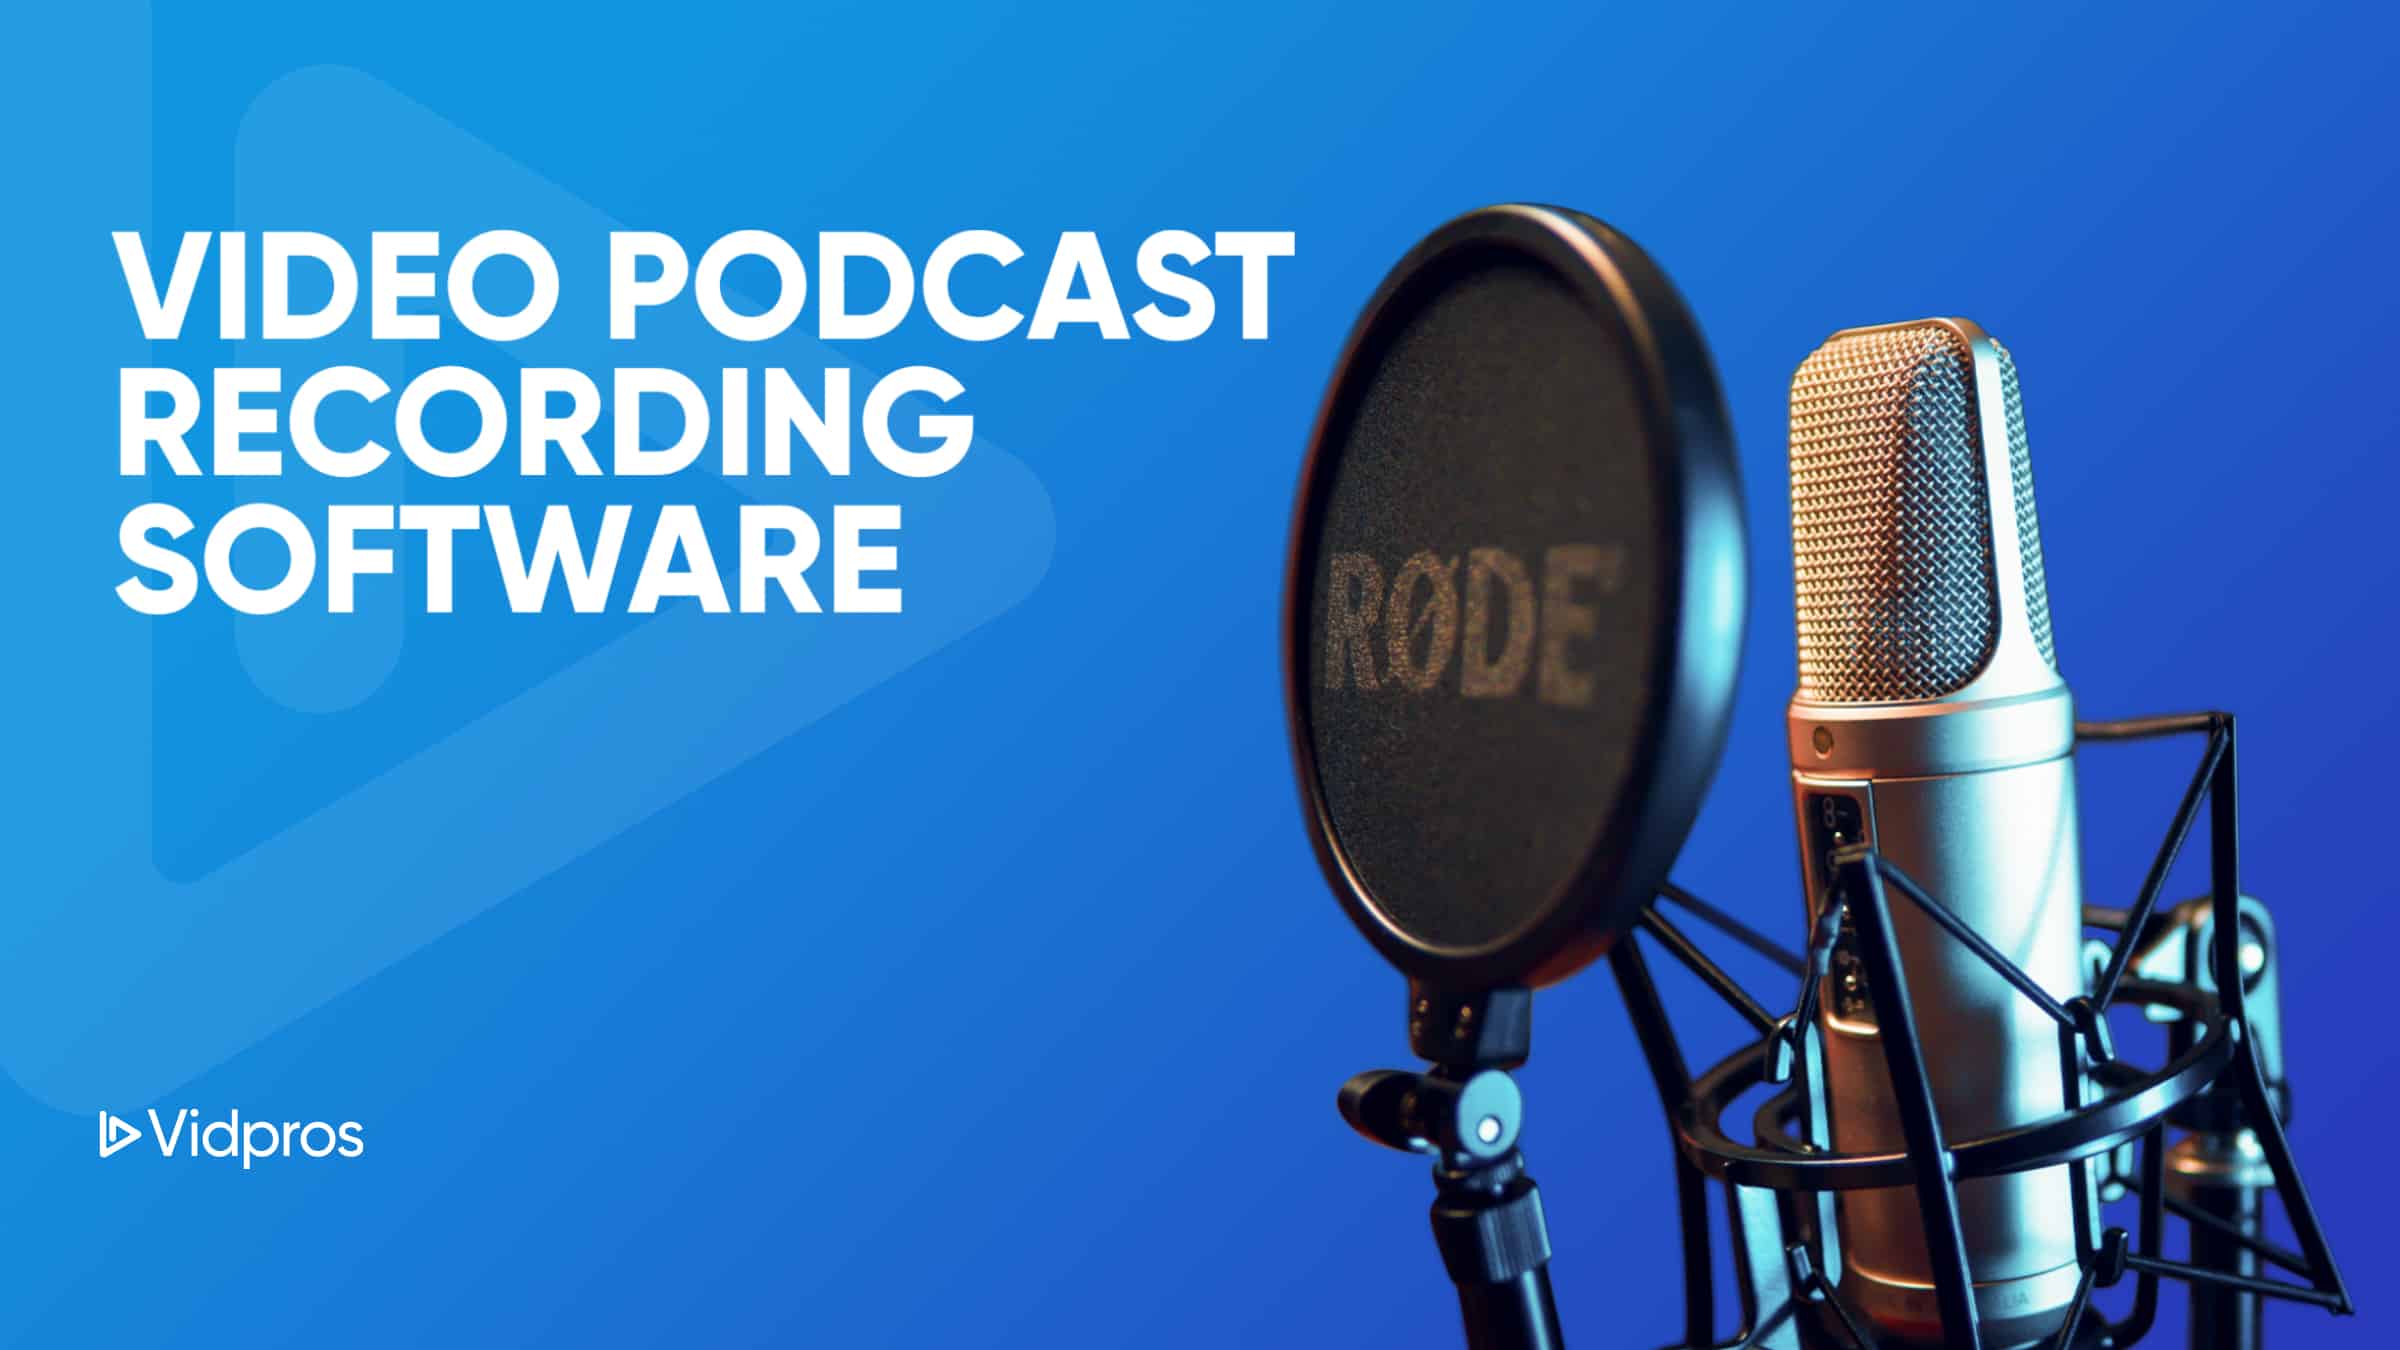 Top Video Podcast Recording Software